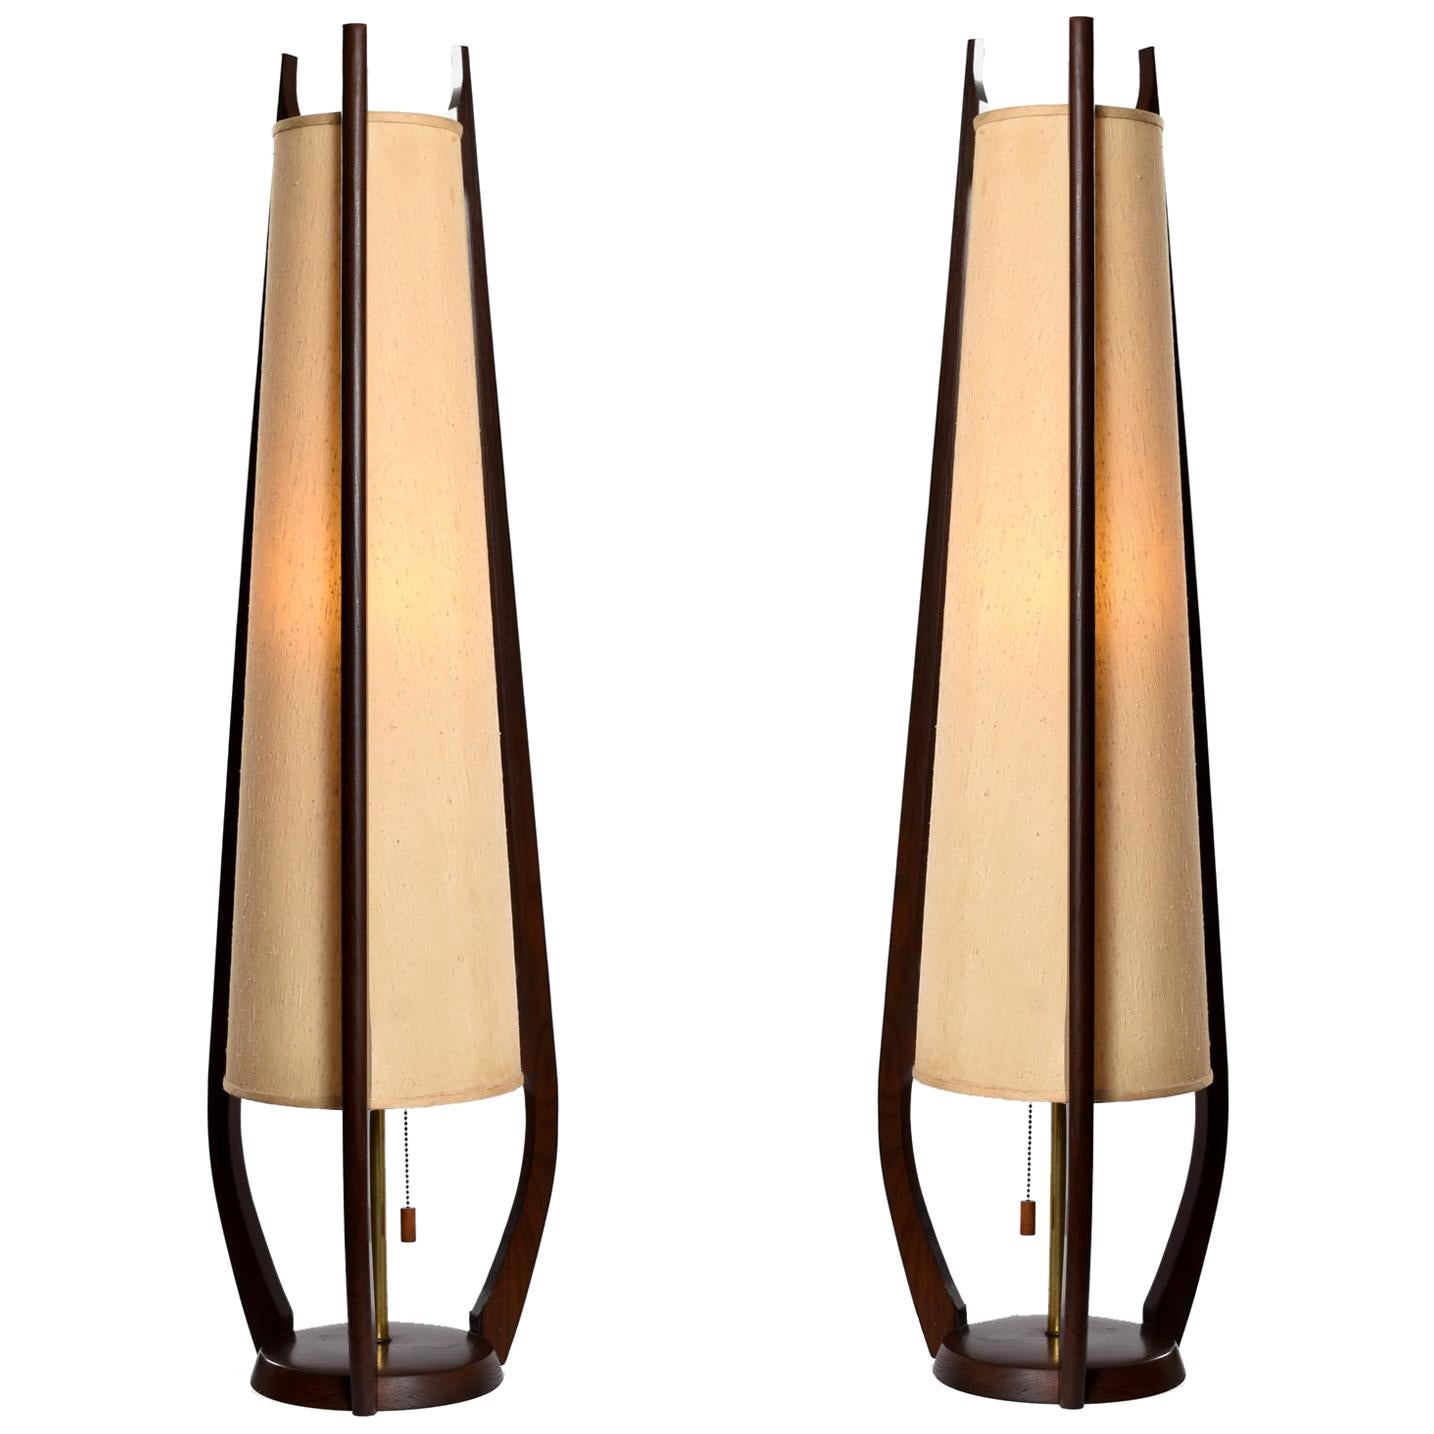 Pair of Modeline Sculpted Spire Cone Shade Walnut Table Lamp, circa 1950s